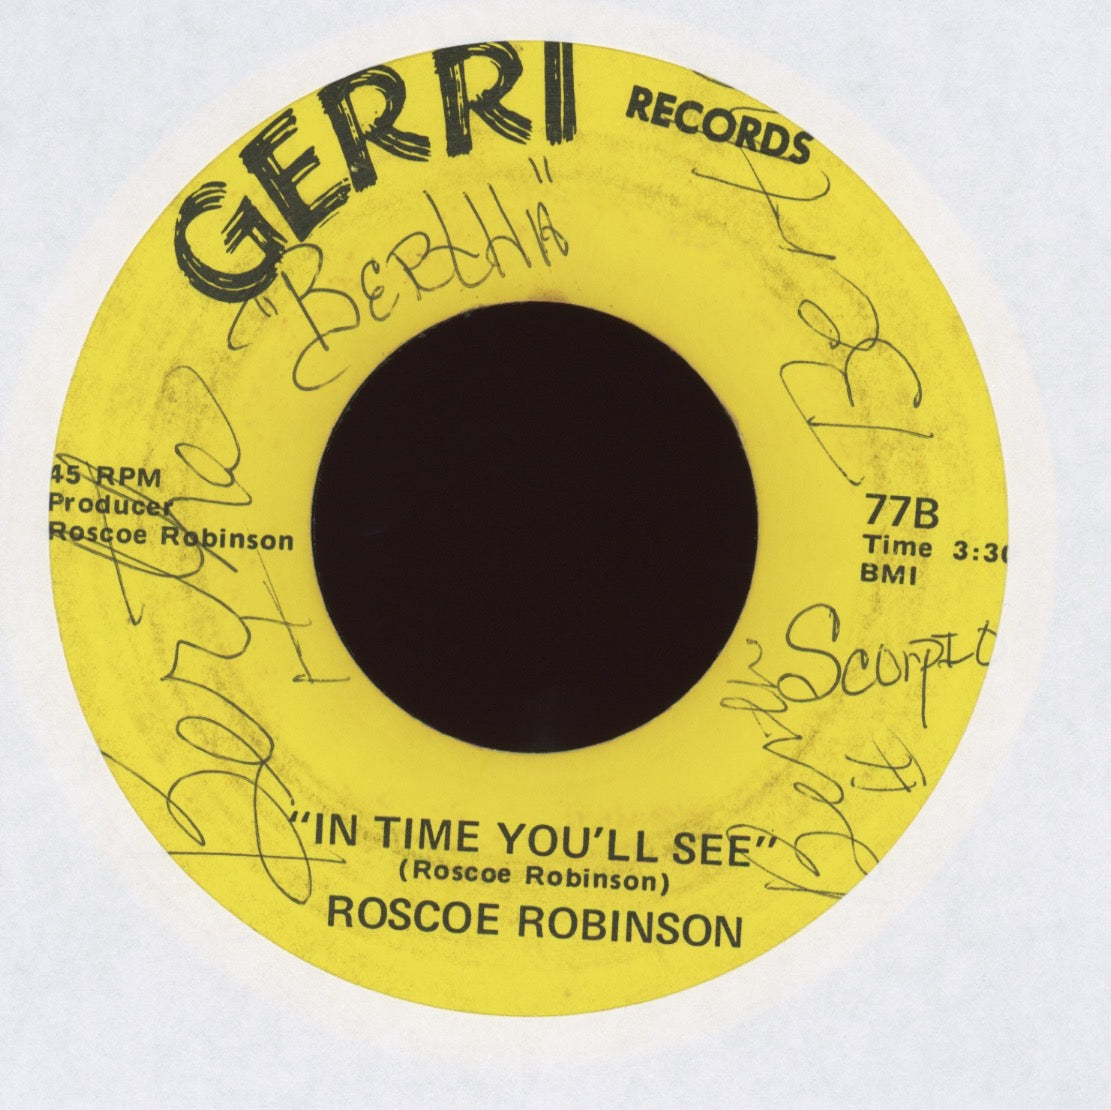 Roscoe Robinson - That's It / In Time You'll See on Gerri